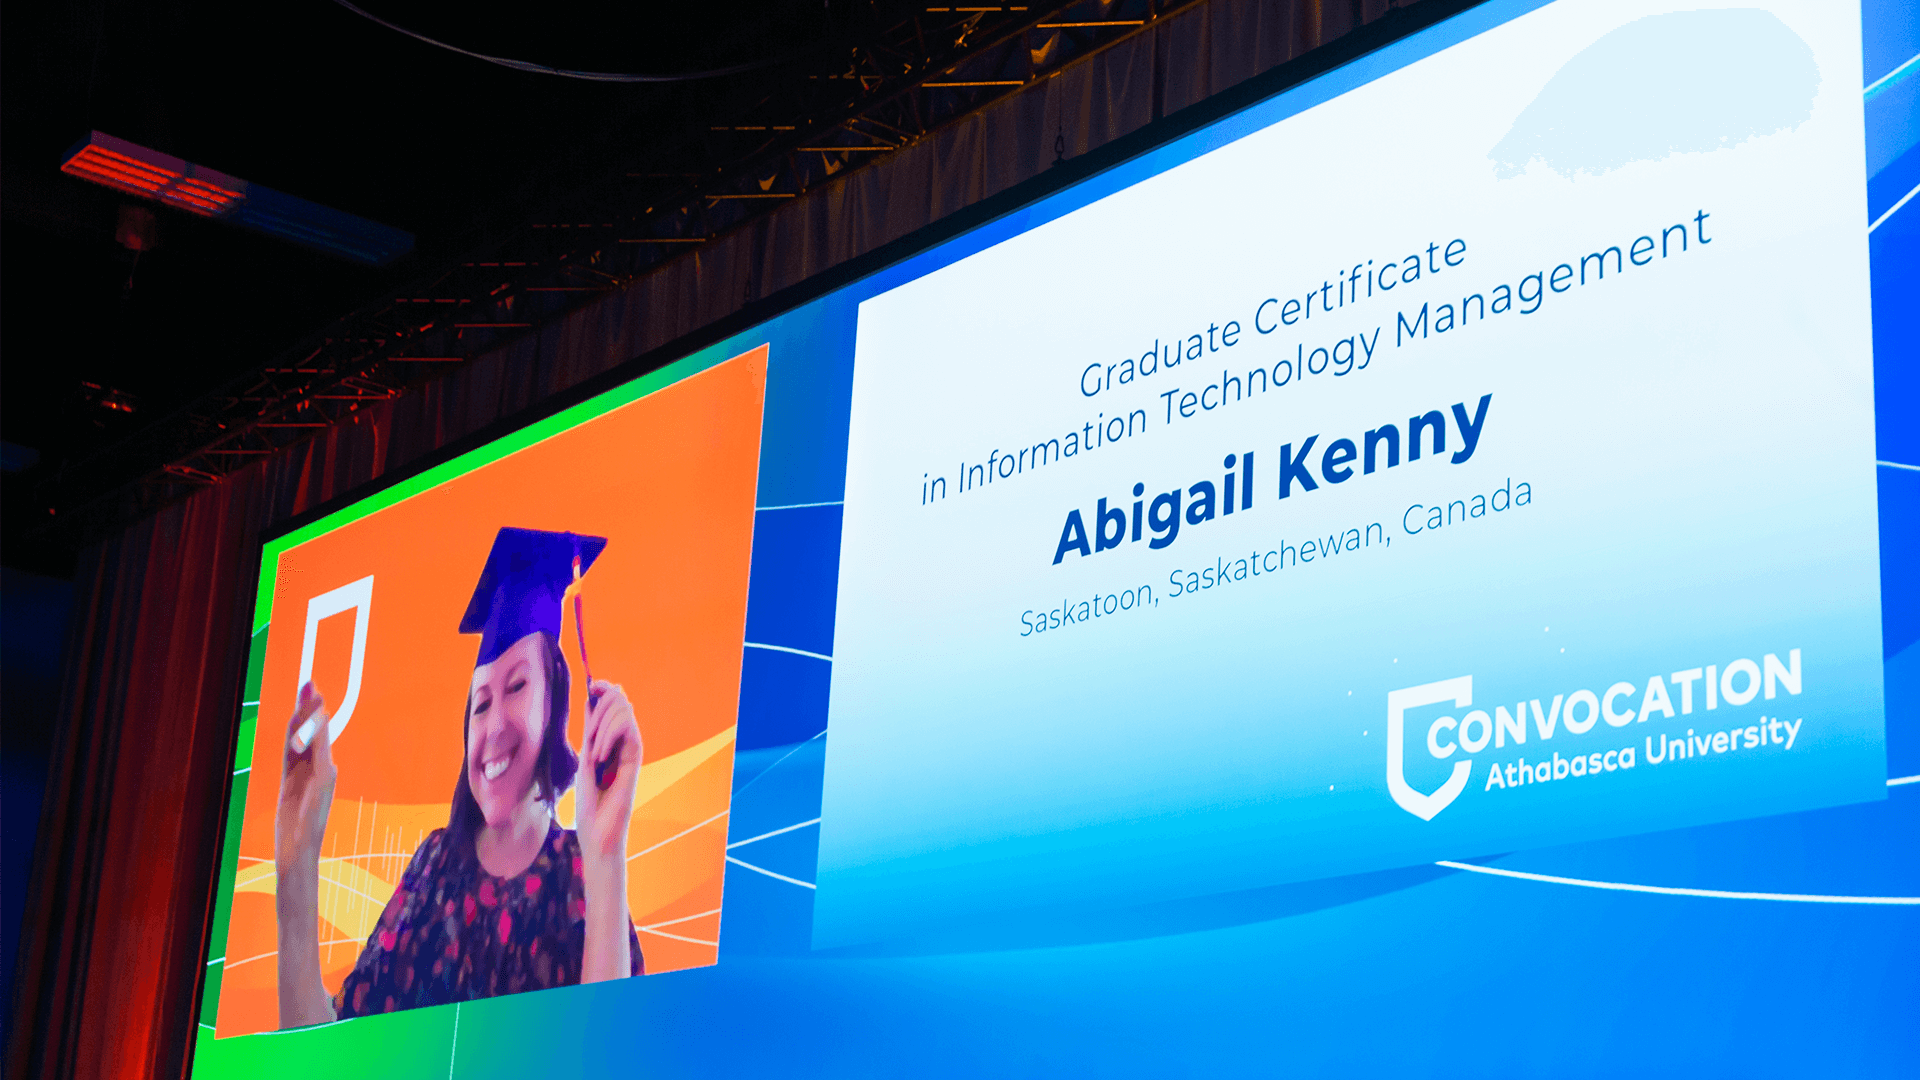 Shot of the big screen in the convocation ceremony showing a virtual graduate attendee and her name and program